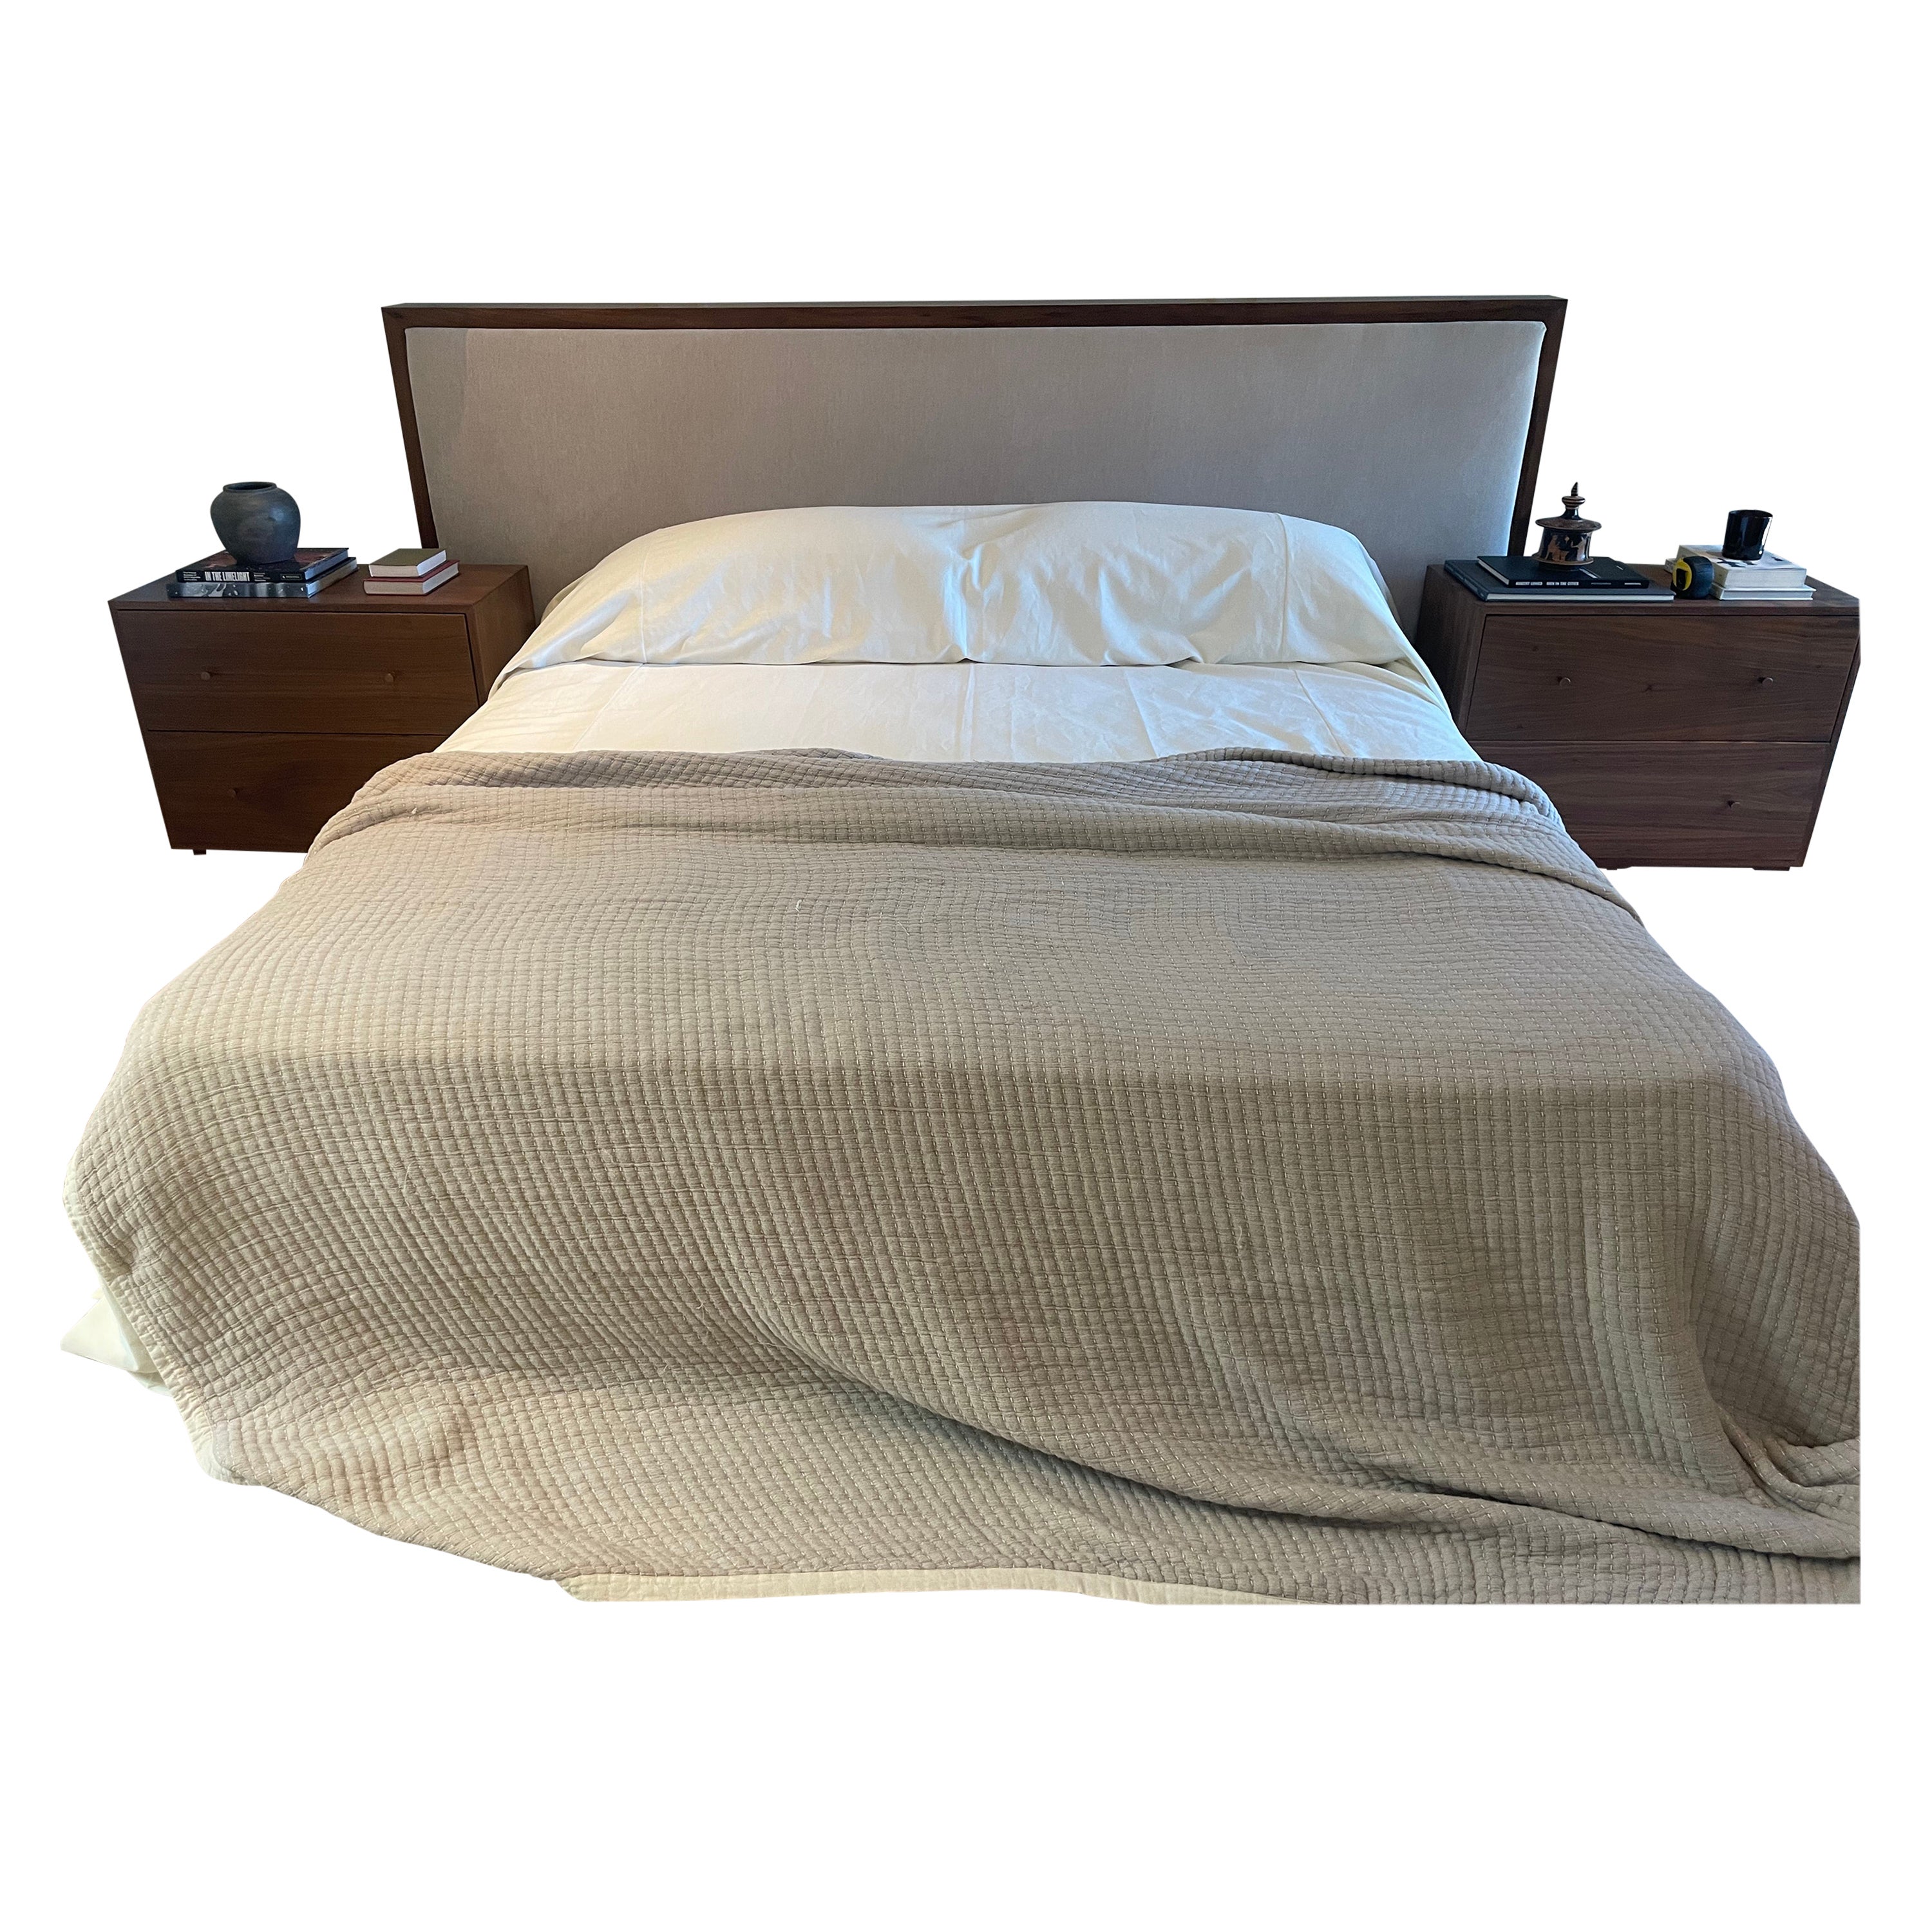 King-Size Bed in Coffee-toned Walnut, Silvered White Mohair Headboard For Sale